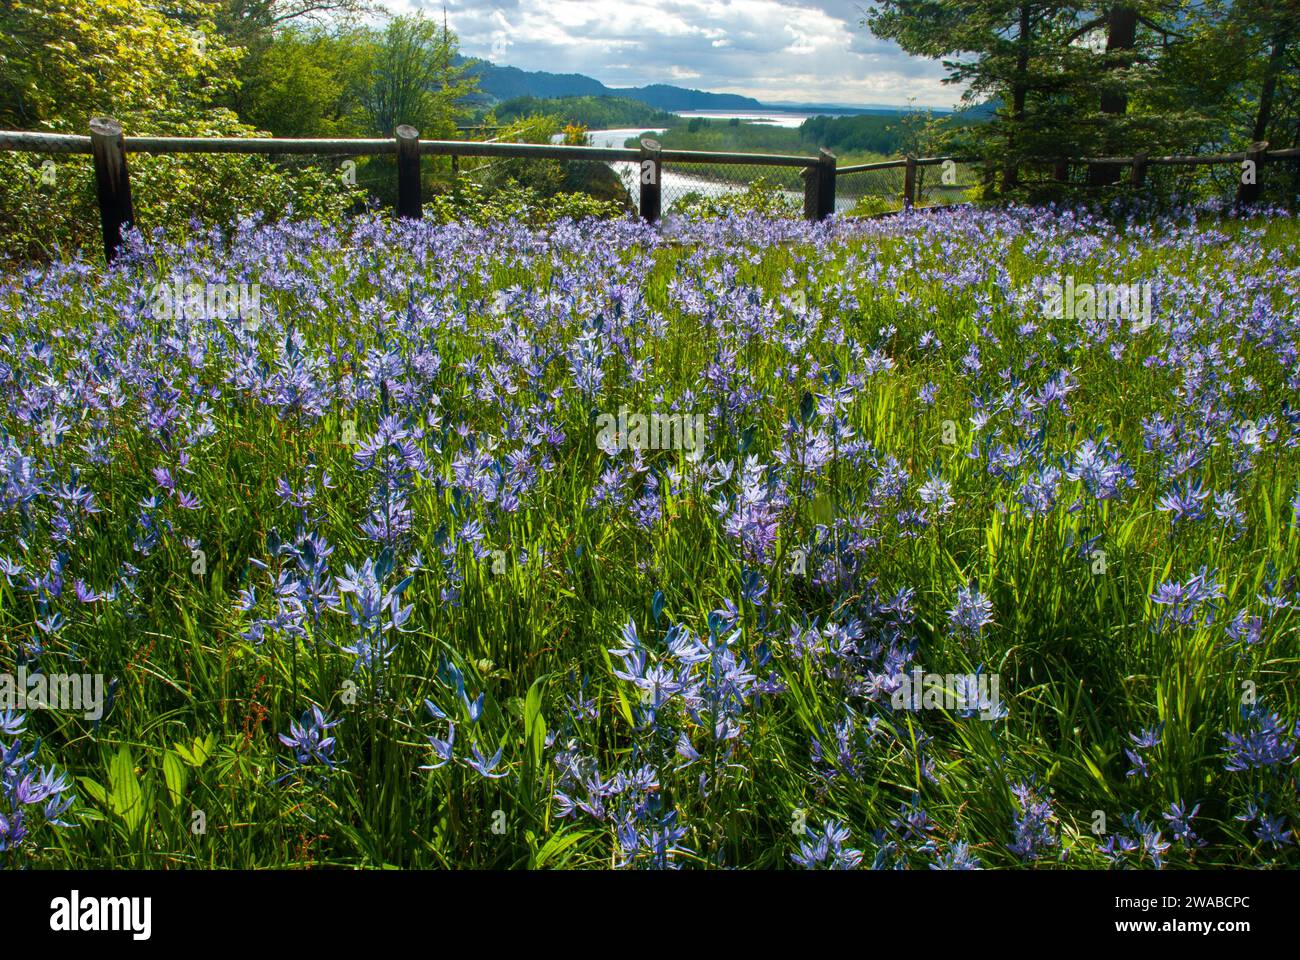 Blue Camas wildflowers over look the Columbia River Gorge from Bridal Veil State Park. Oregon. Stock Photo